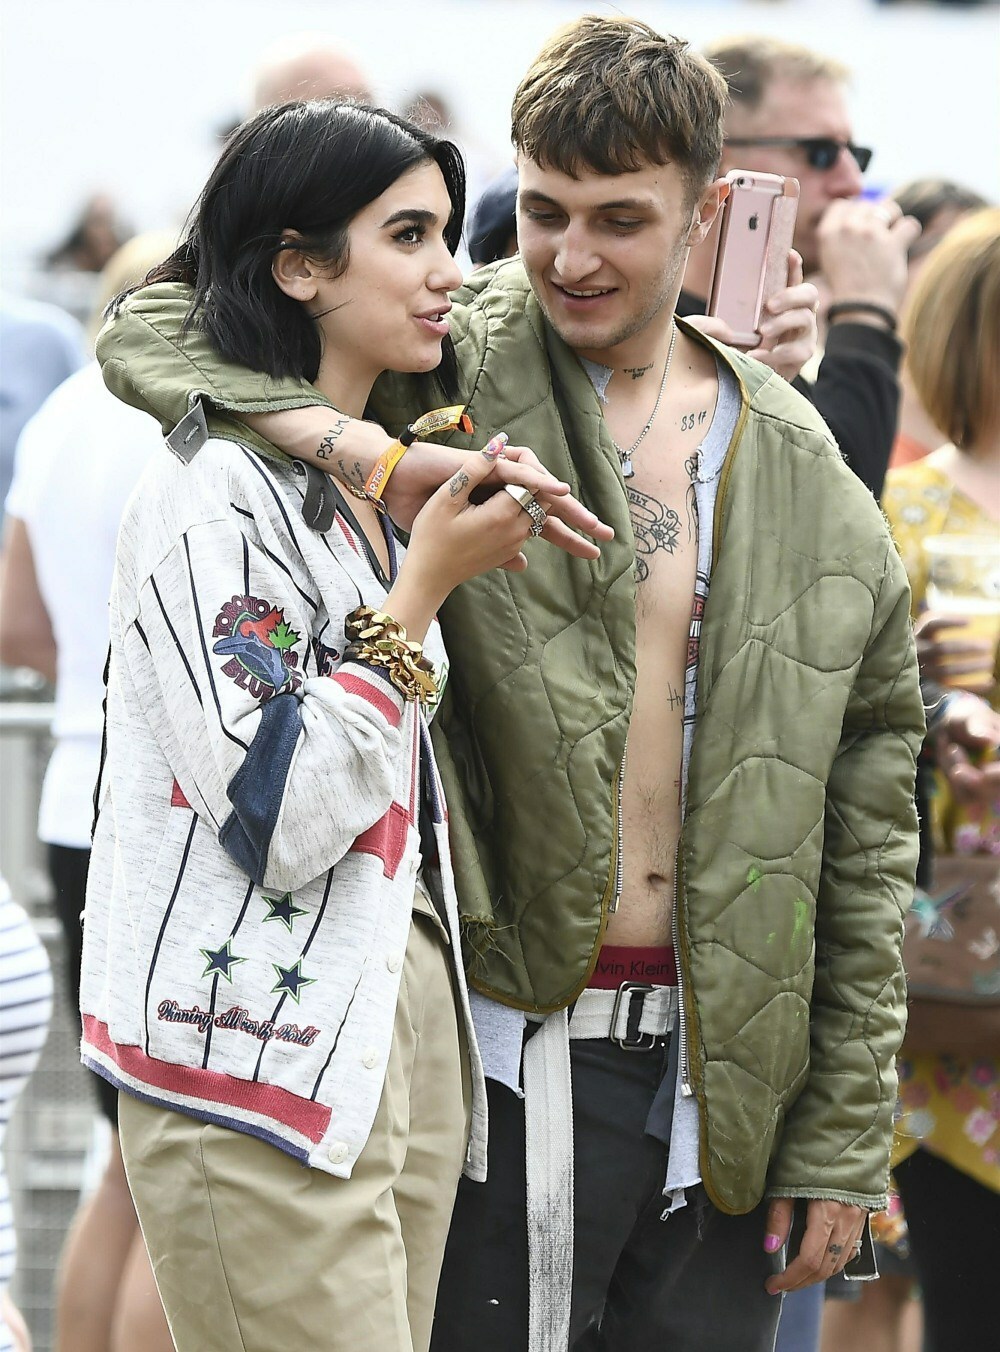 "The 'Hugo Boss-man' follows 'New Rules'!": After two and a half months of dating, Dua Lipa and Anwar Hadid moving in together! 9